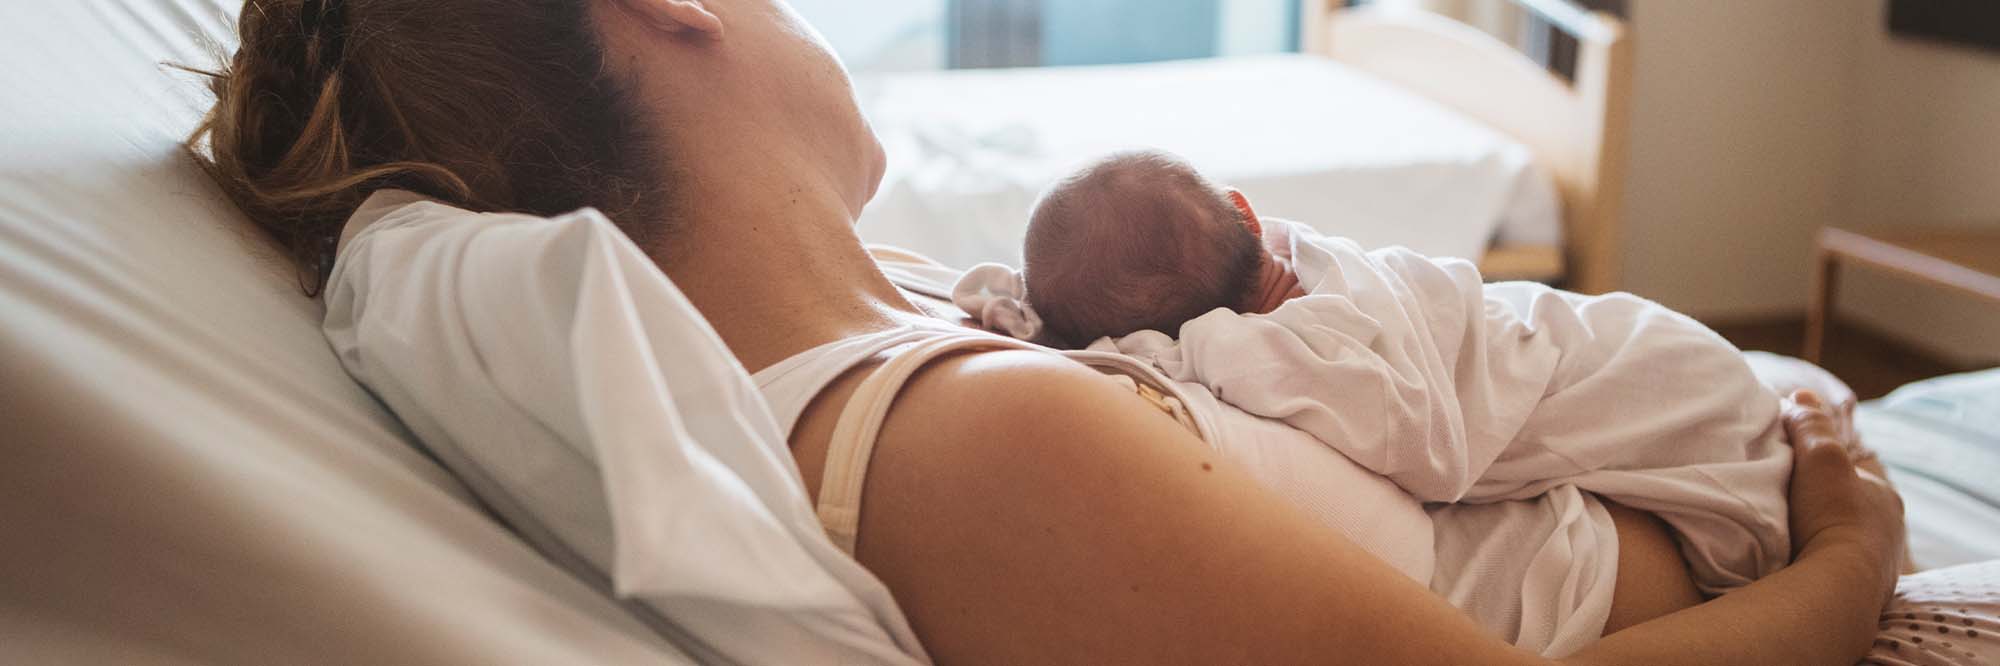 Postpartum recovery: What to expect